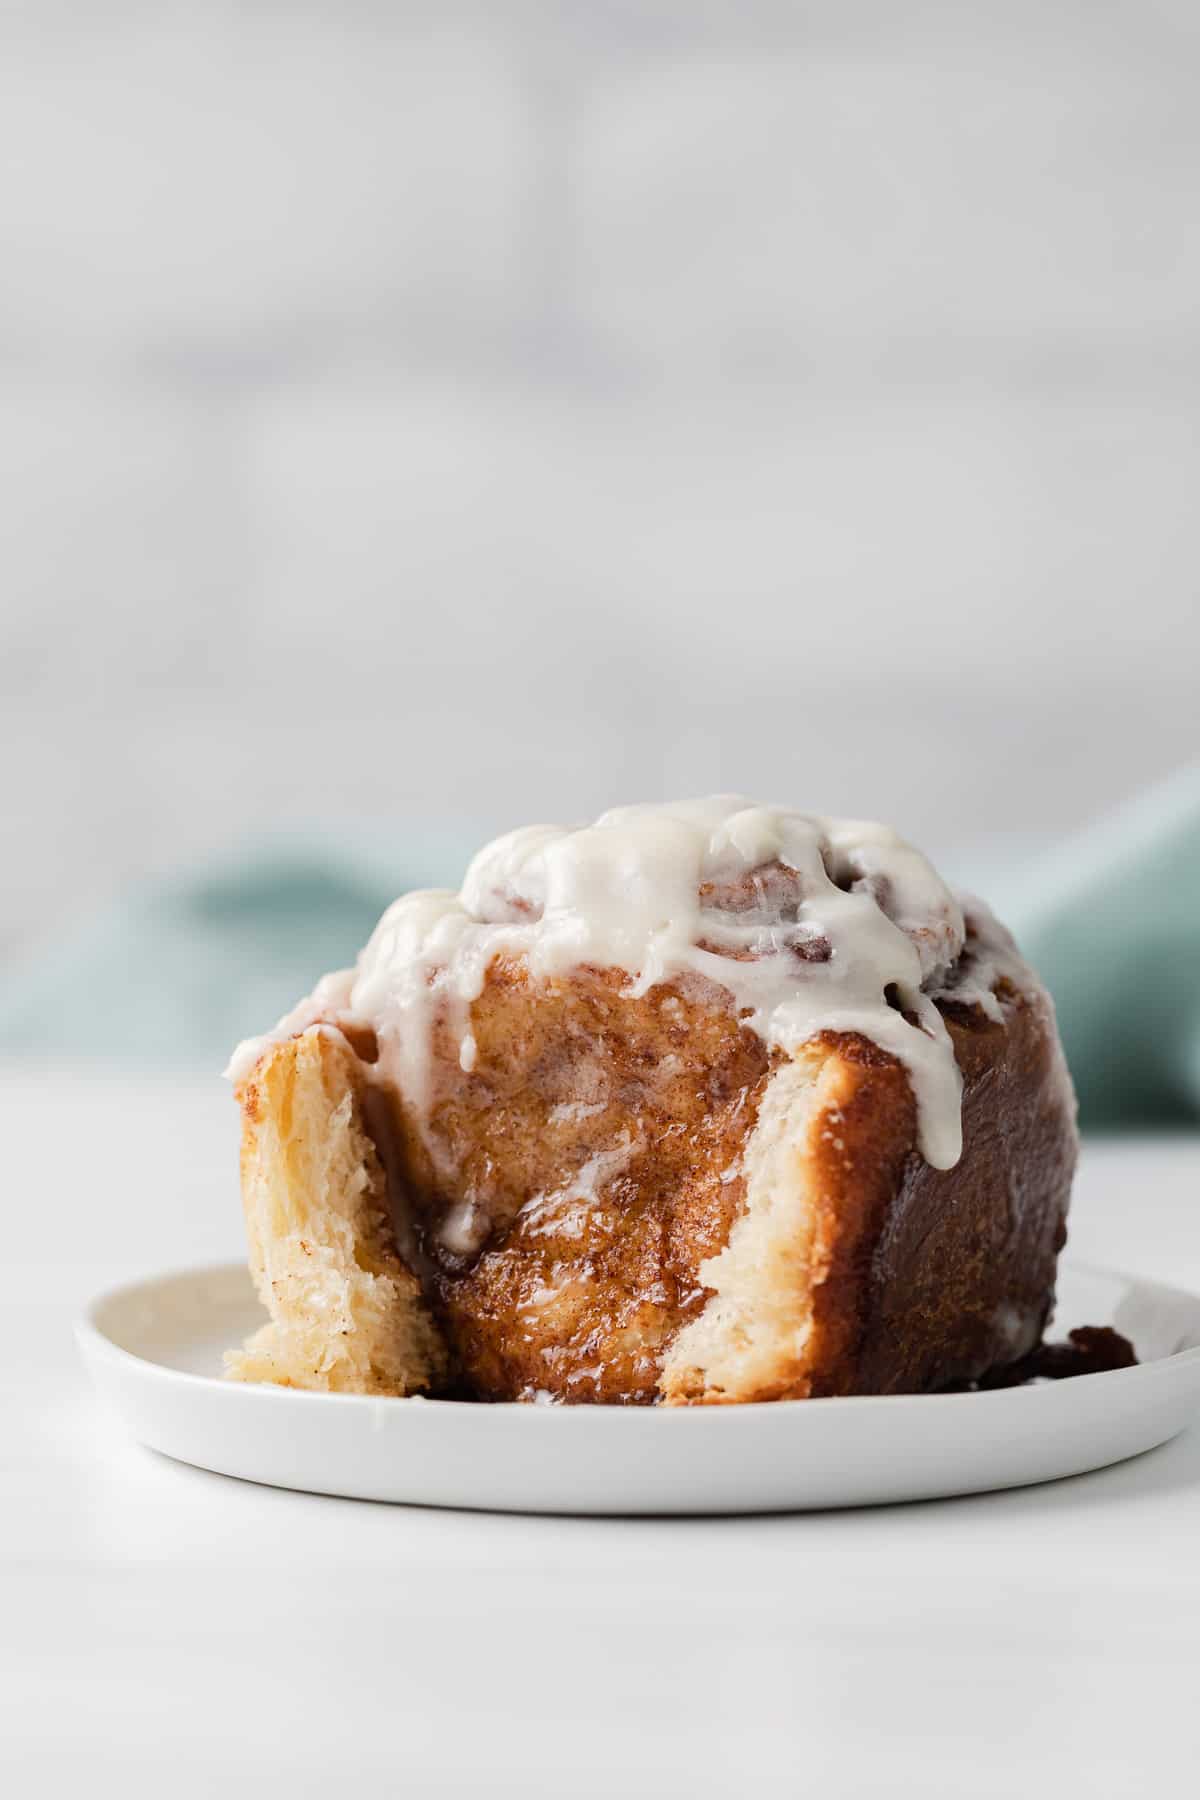 side view of a single cinnamon roll on a white plate with teal napkin behind